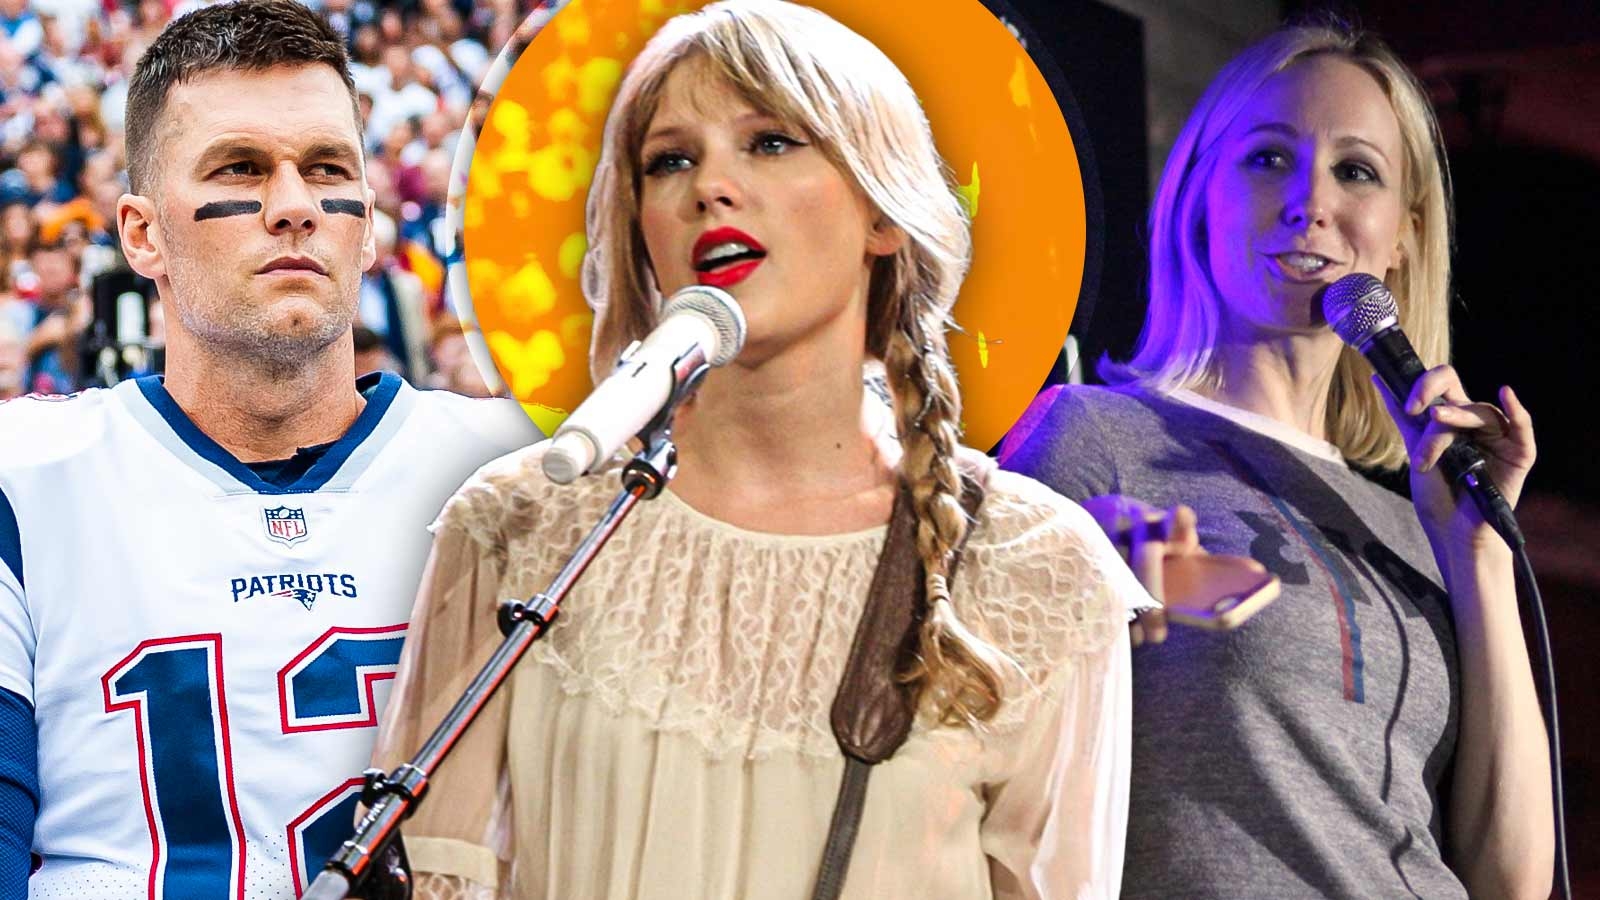 “Its kind of for me either that or cocaine”: After Roasting Tom Brady, Nikki Glaser Reveals True Love For Taylor Swift That Made Her Watch 5 Eras Tour Shows in 10 Days